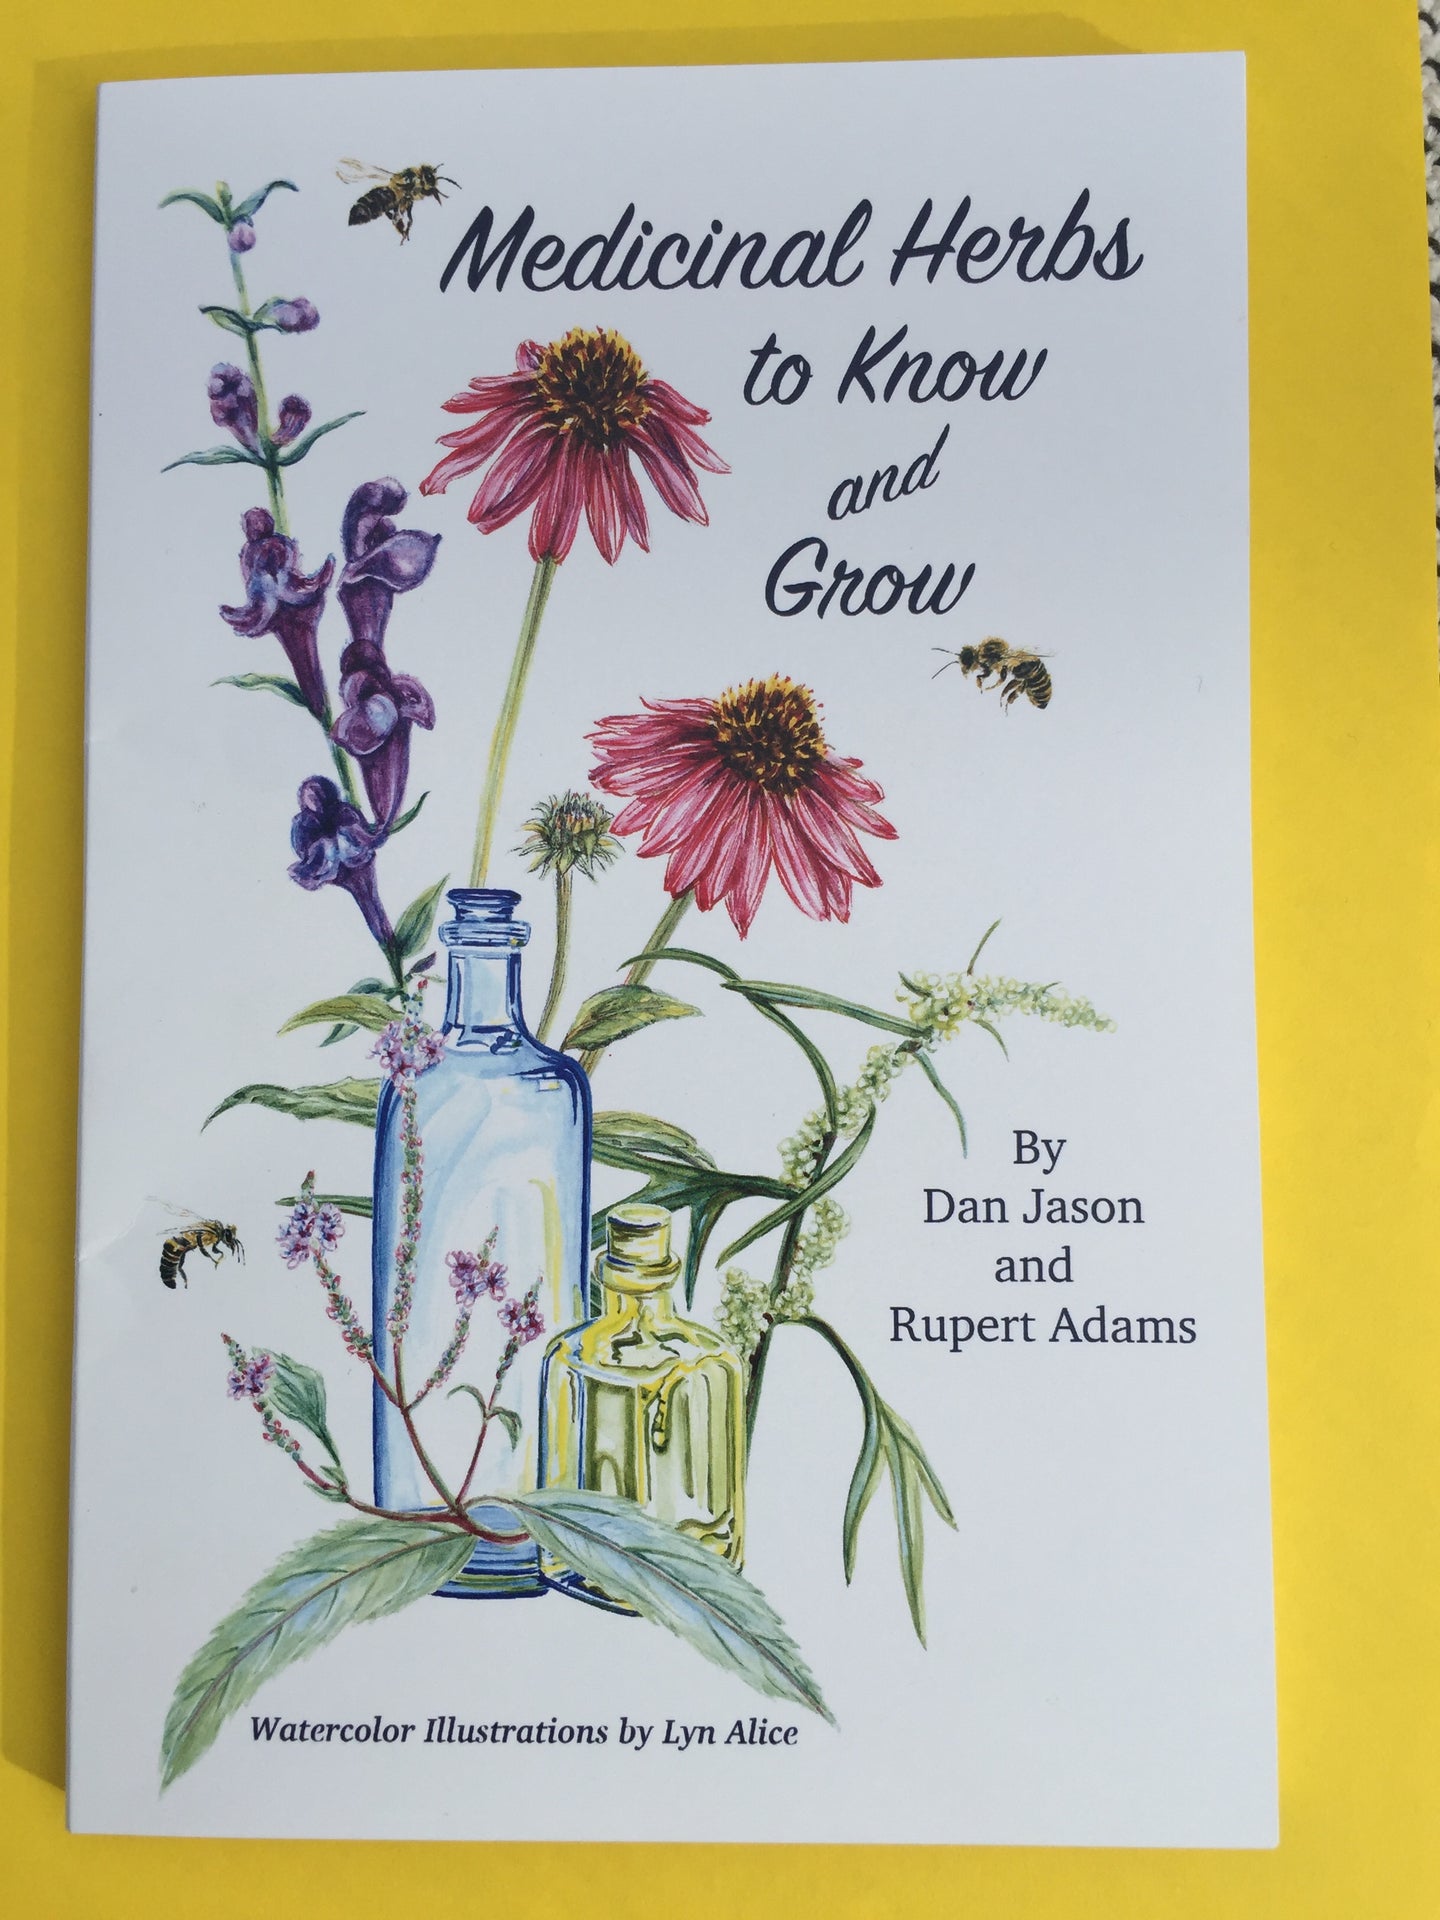 Medicinal Herbs to Know and Grow